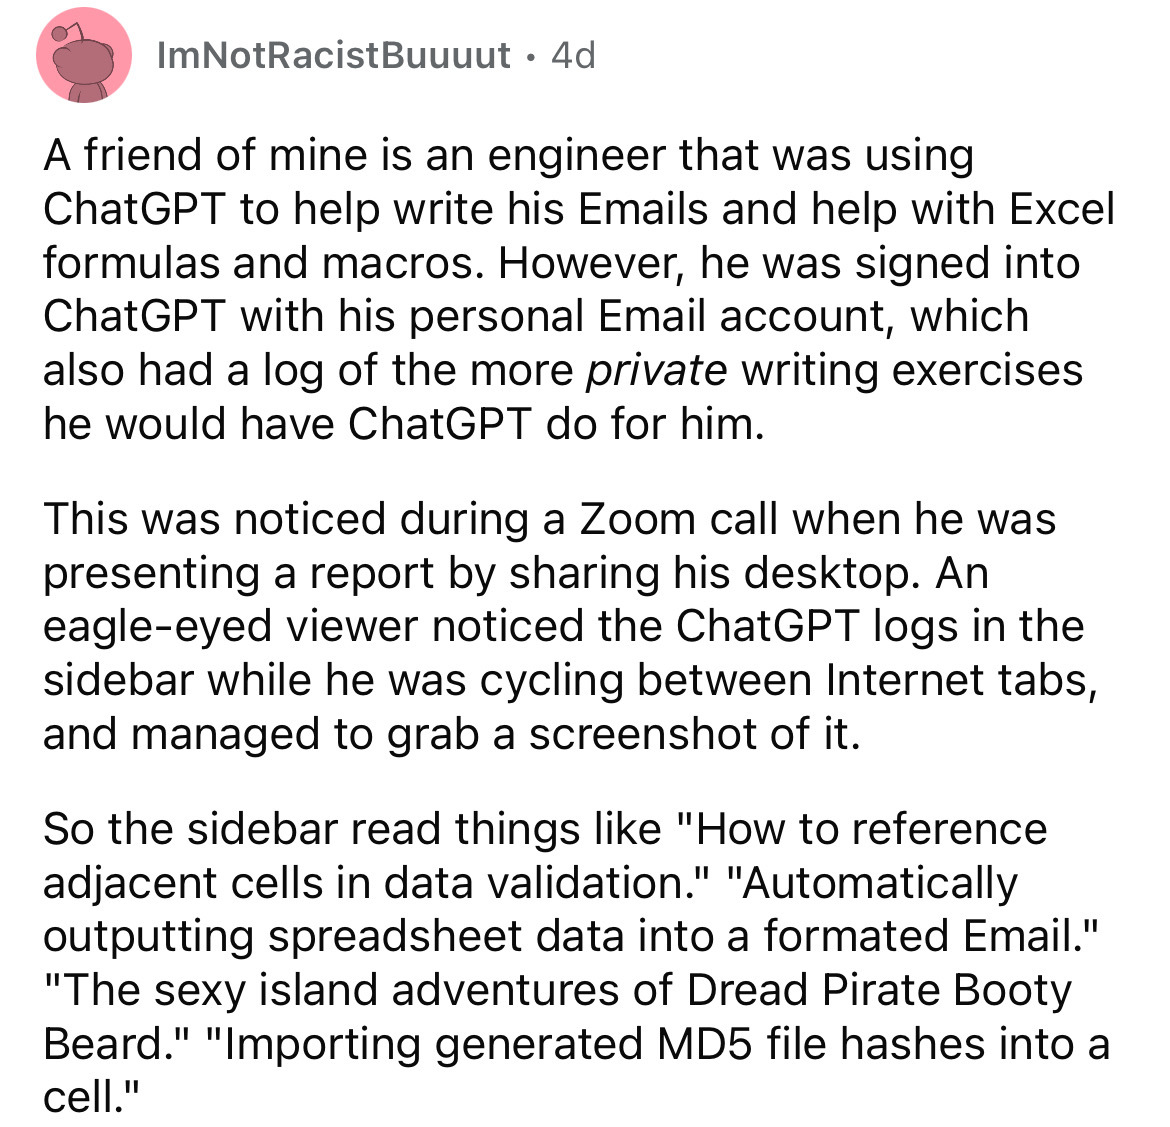 document - ImNotRacistBuuuut. 4d A friend of mine is an engineer that was using ChatGPT to help write his Emails and help with Excel formulas and macros. However, he was signed into ChatGPT with his personal Email account, which also had a log of the more